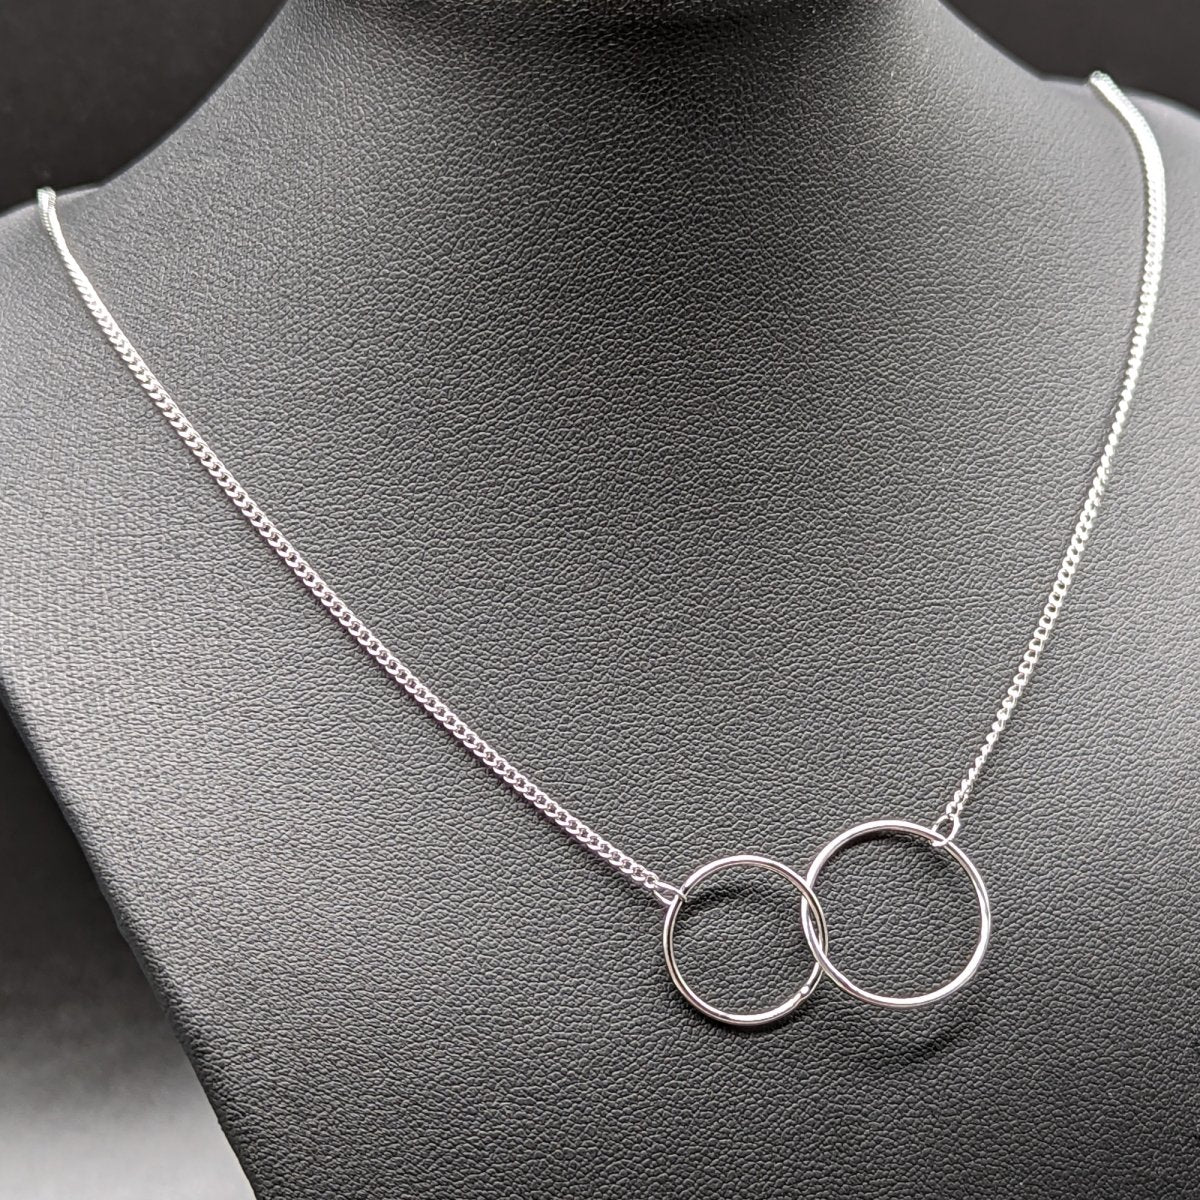 Interlocking Circles Necklace - DNA doesn't make you family, love does - Meaningful Cards